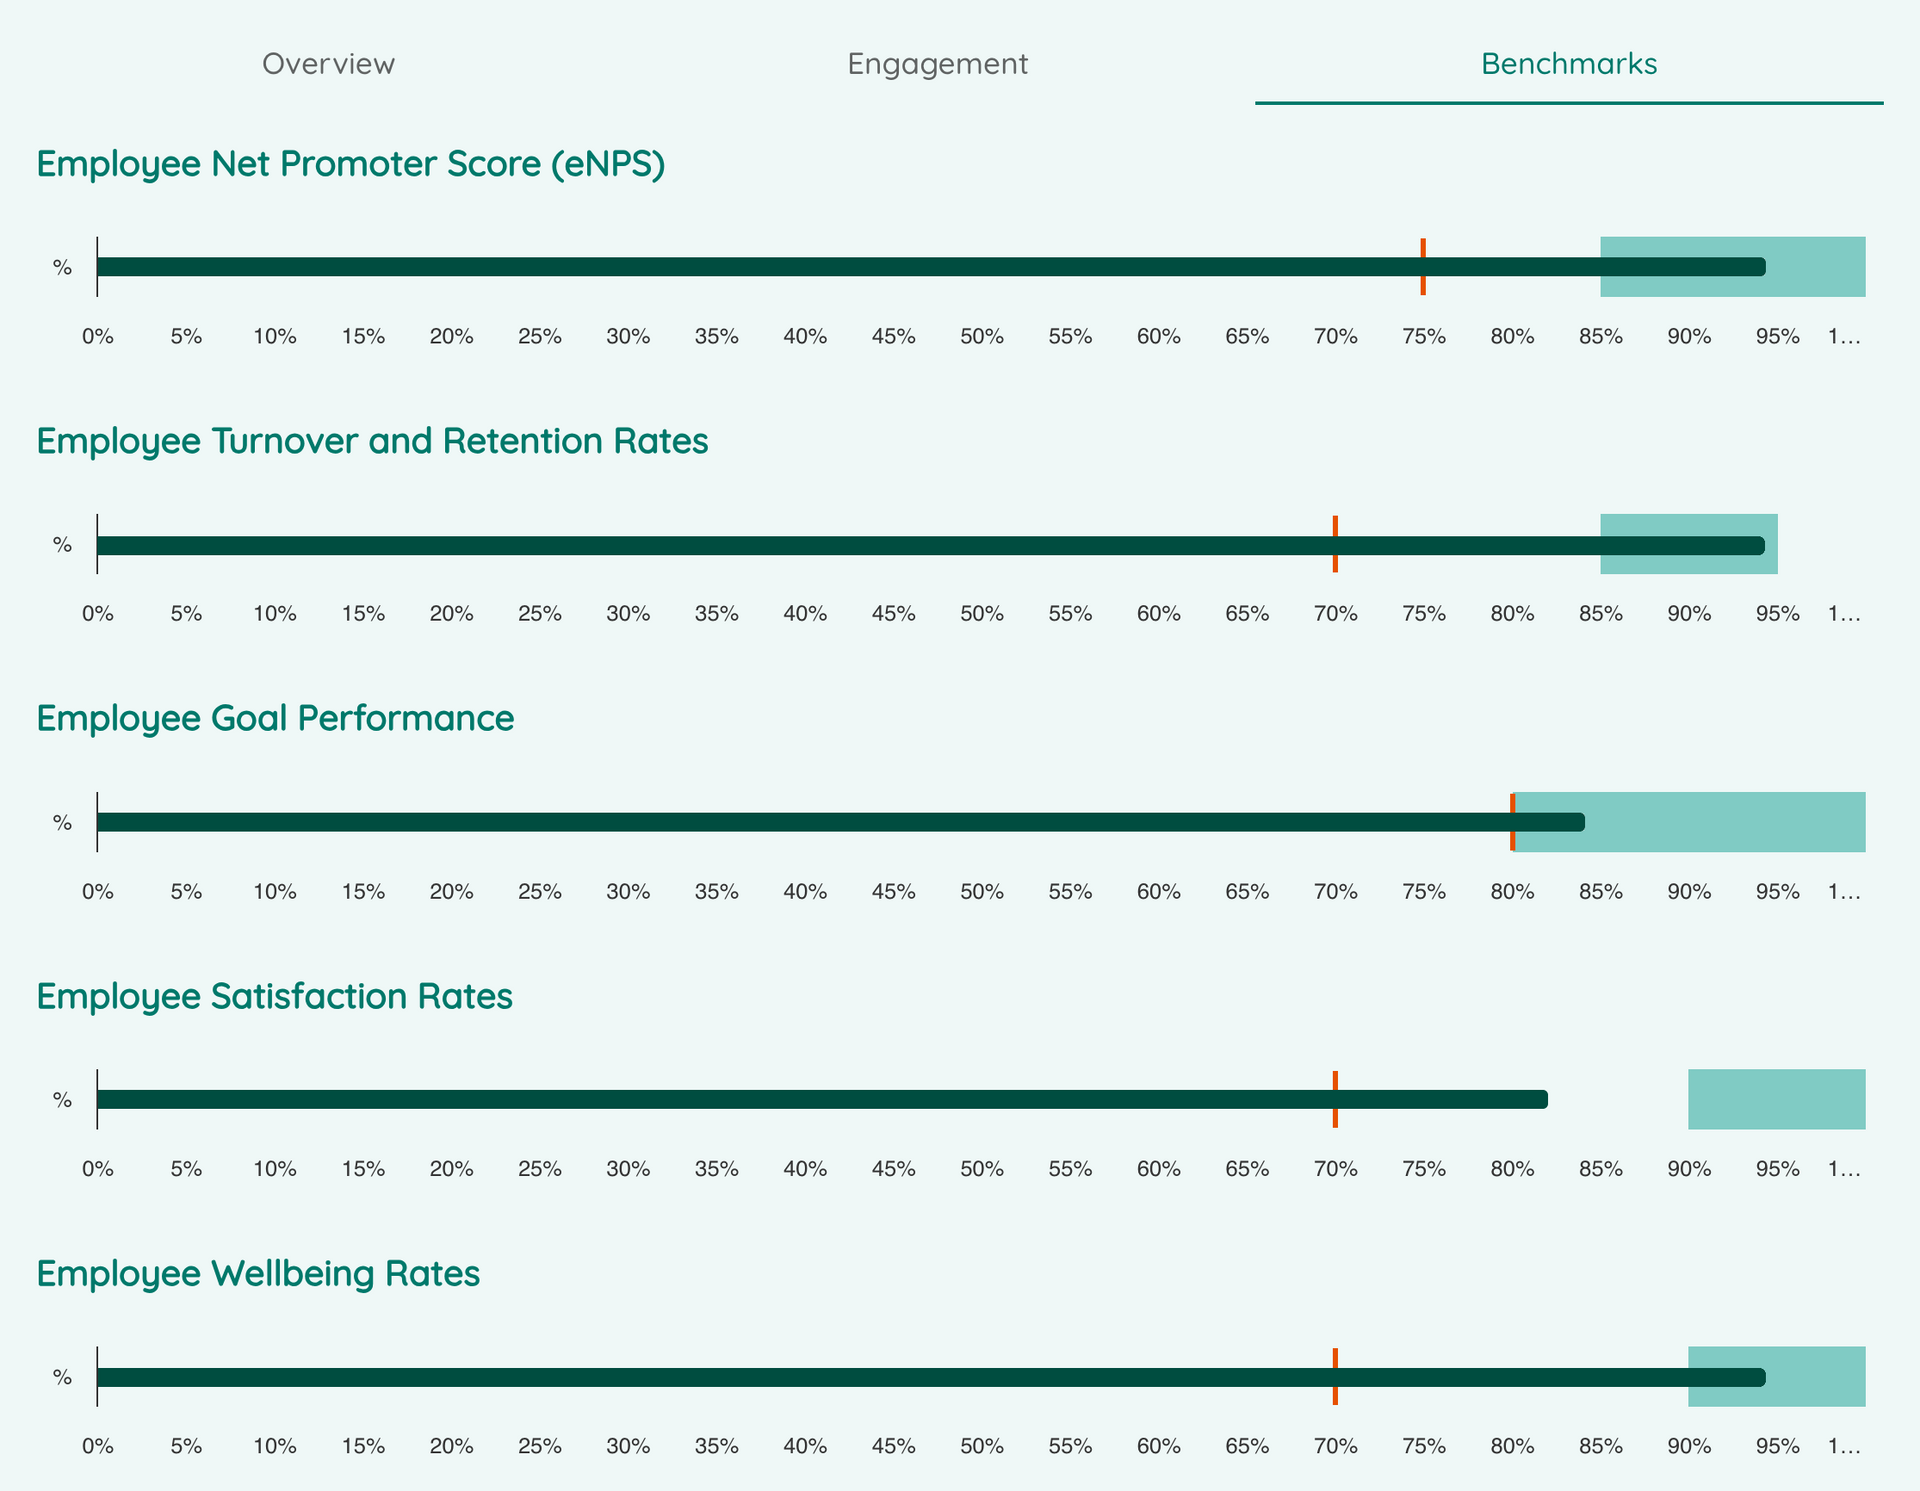 Employee engagement and experience benchmarks